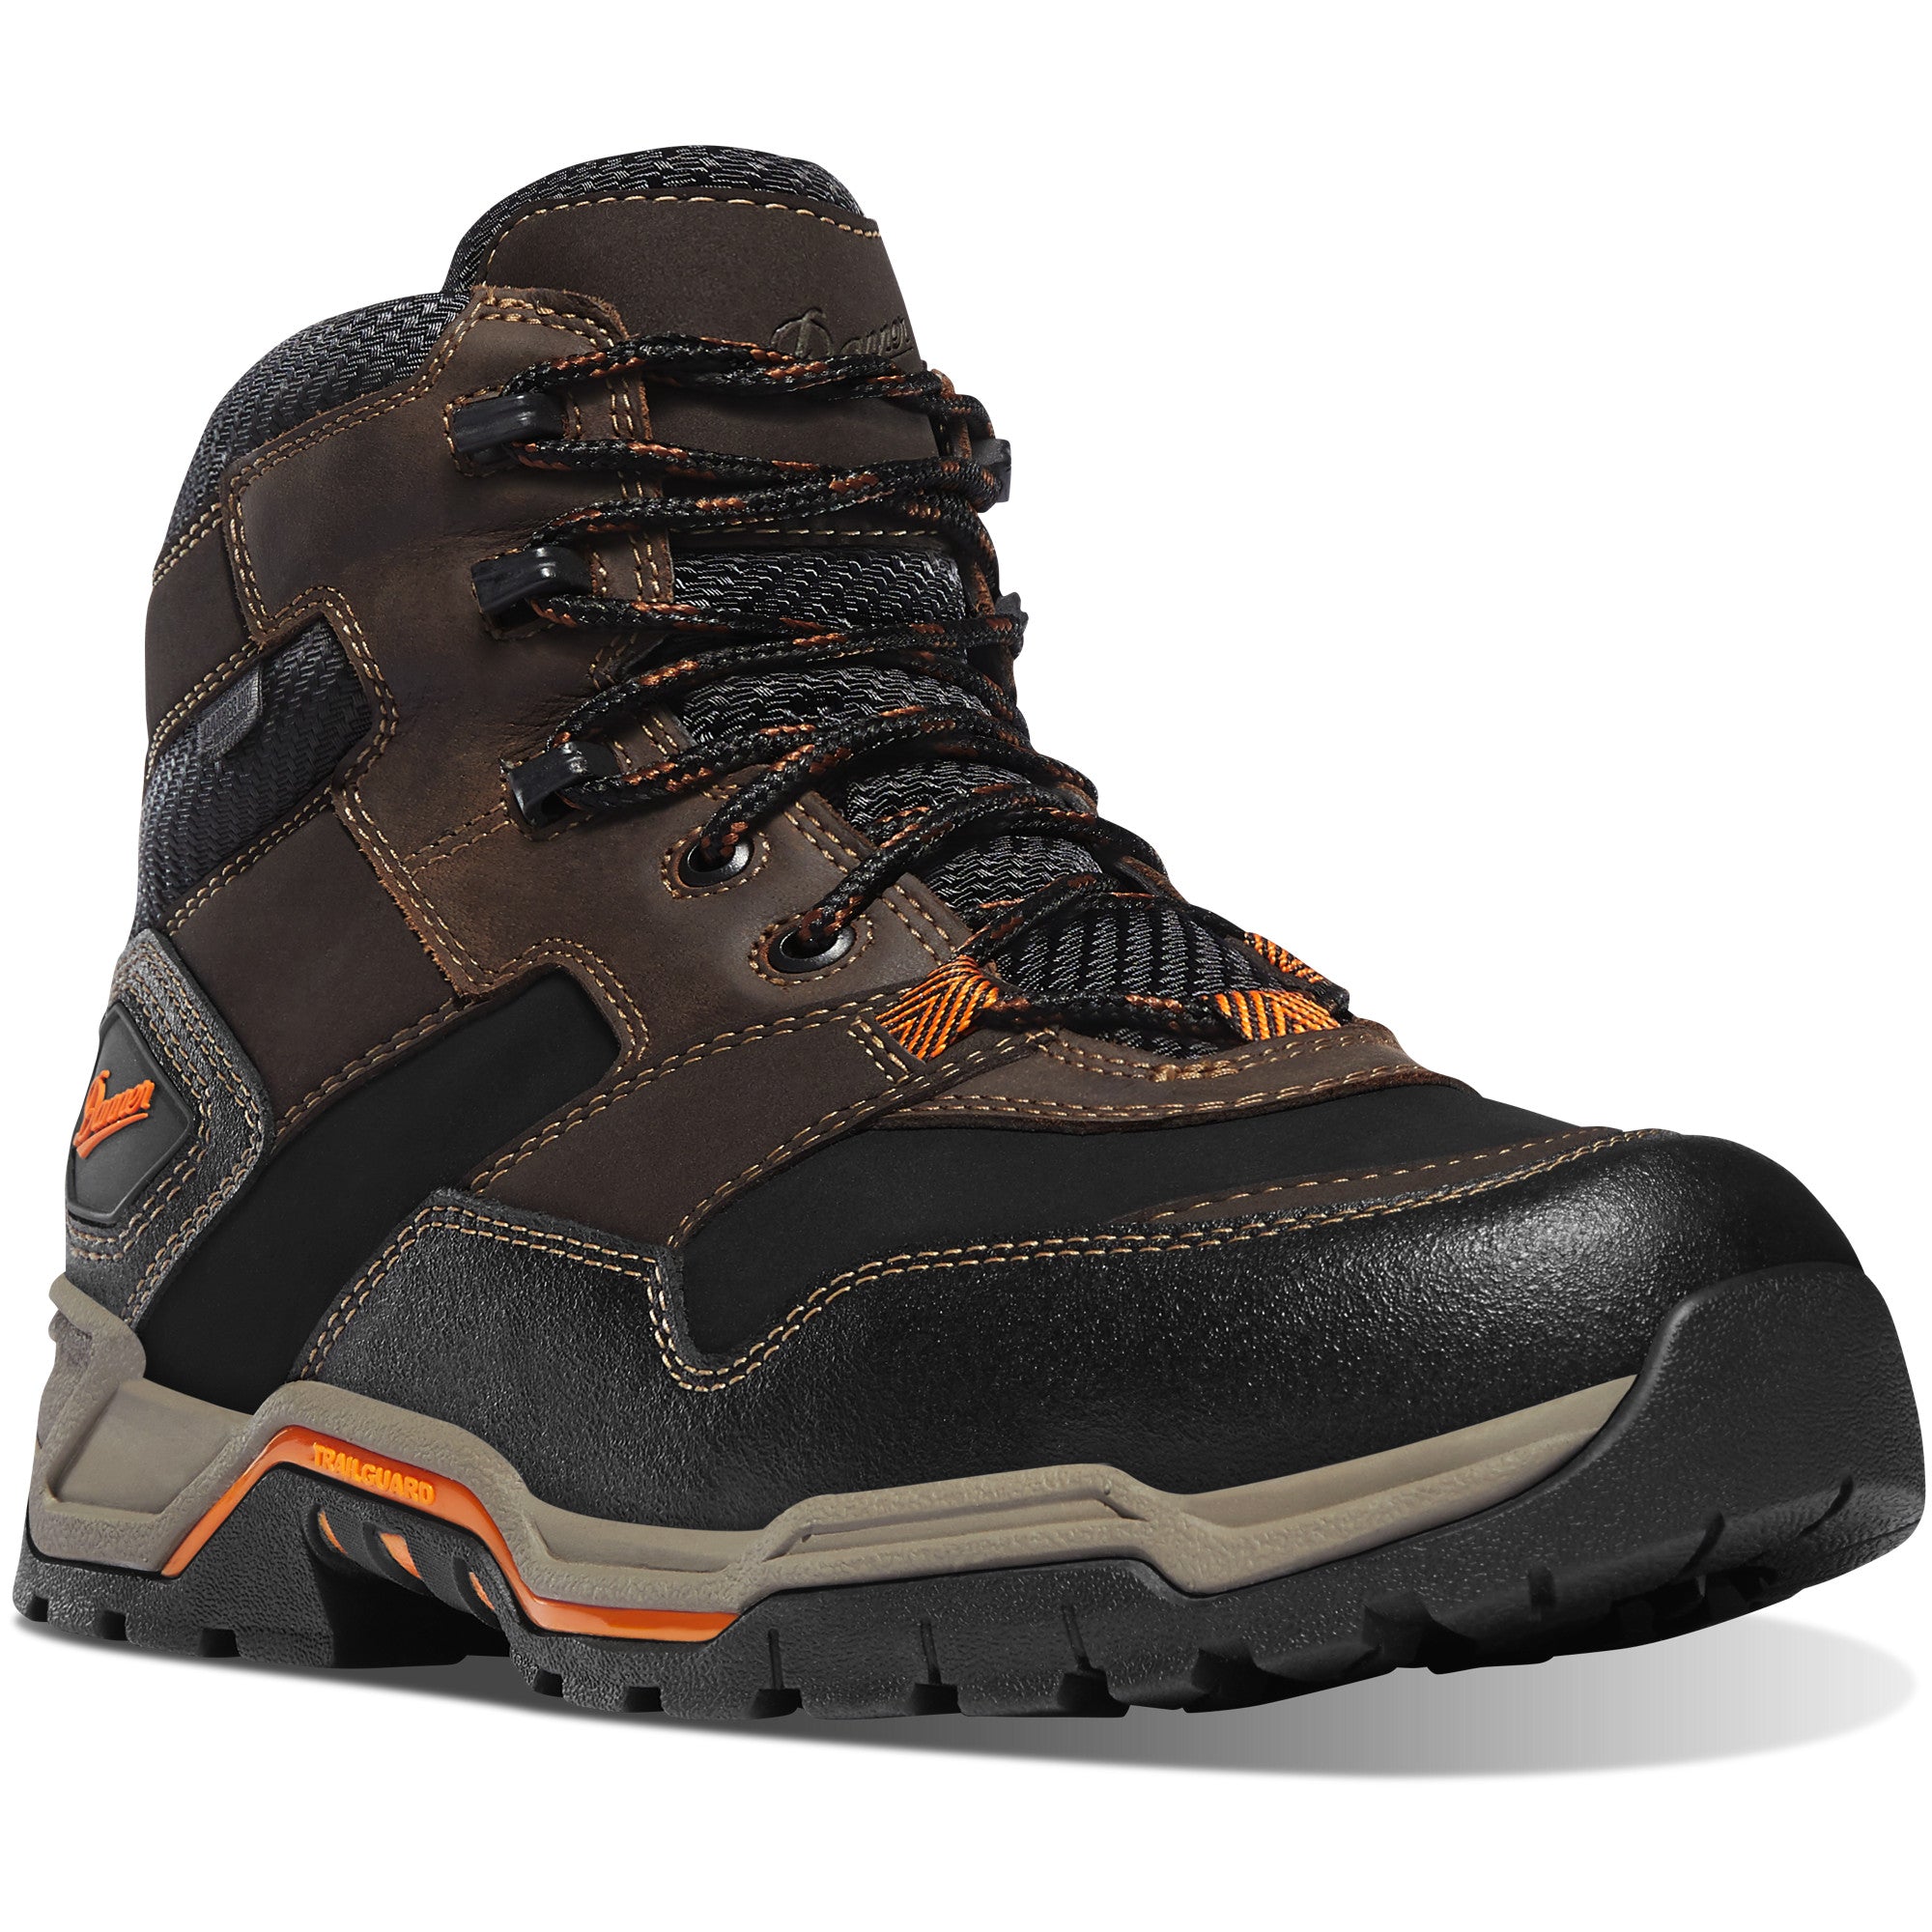 Danner Men's Field Ranger 6" Waterproof Composite Safety Toe Work Boot in Brown from the side